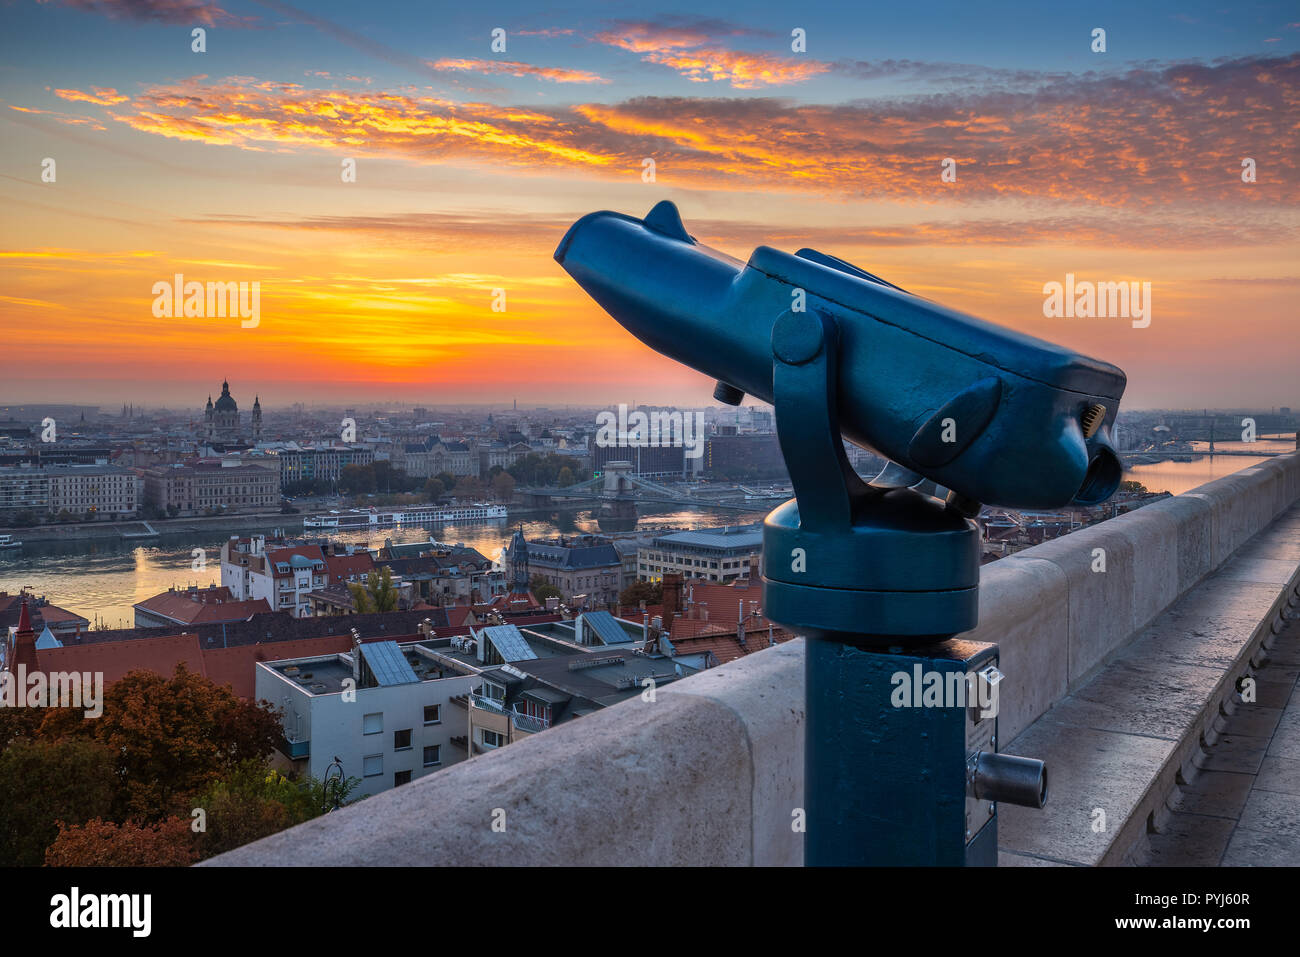 Budapest, Hungary - Blue binoculars with the view of Pest with St. Stephen's Basilica, Szechenyi Chain Bridge and beautiful sky and clouds at sunrise Stock Photo